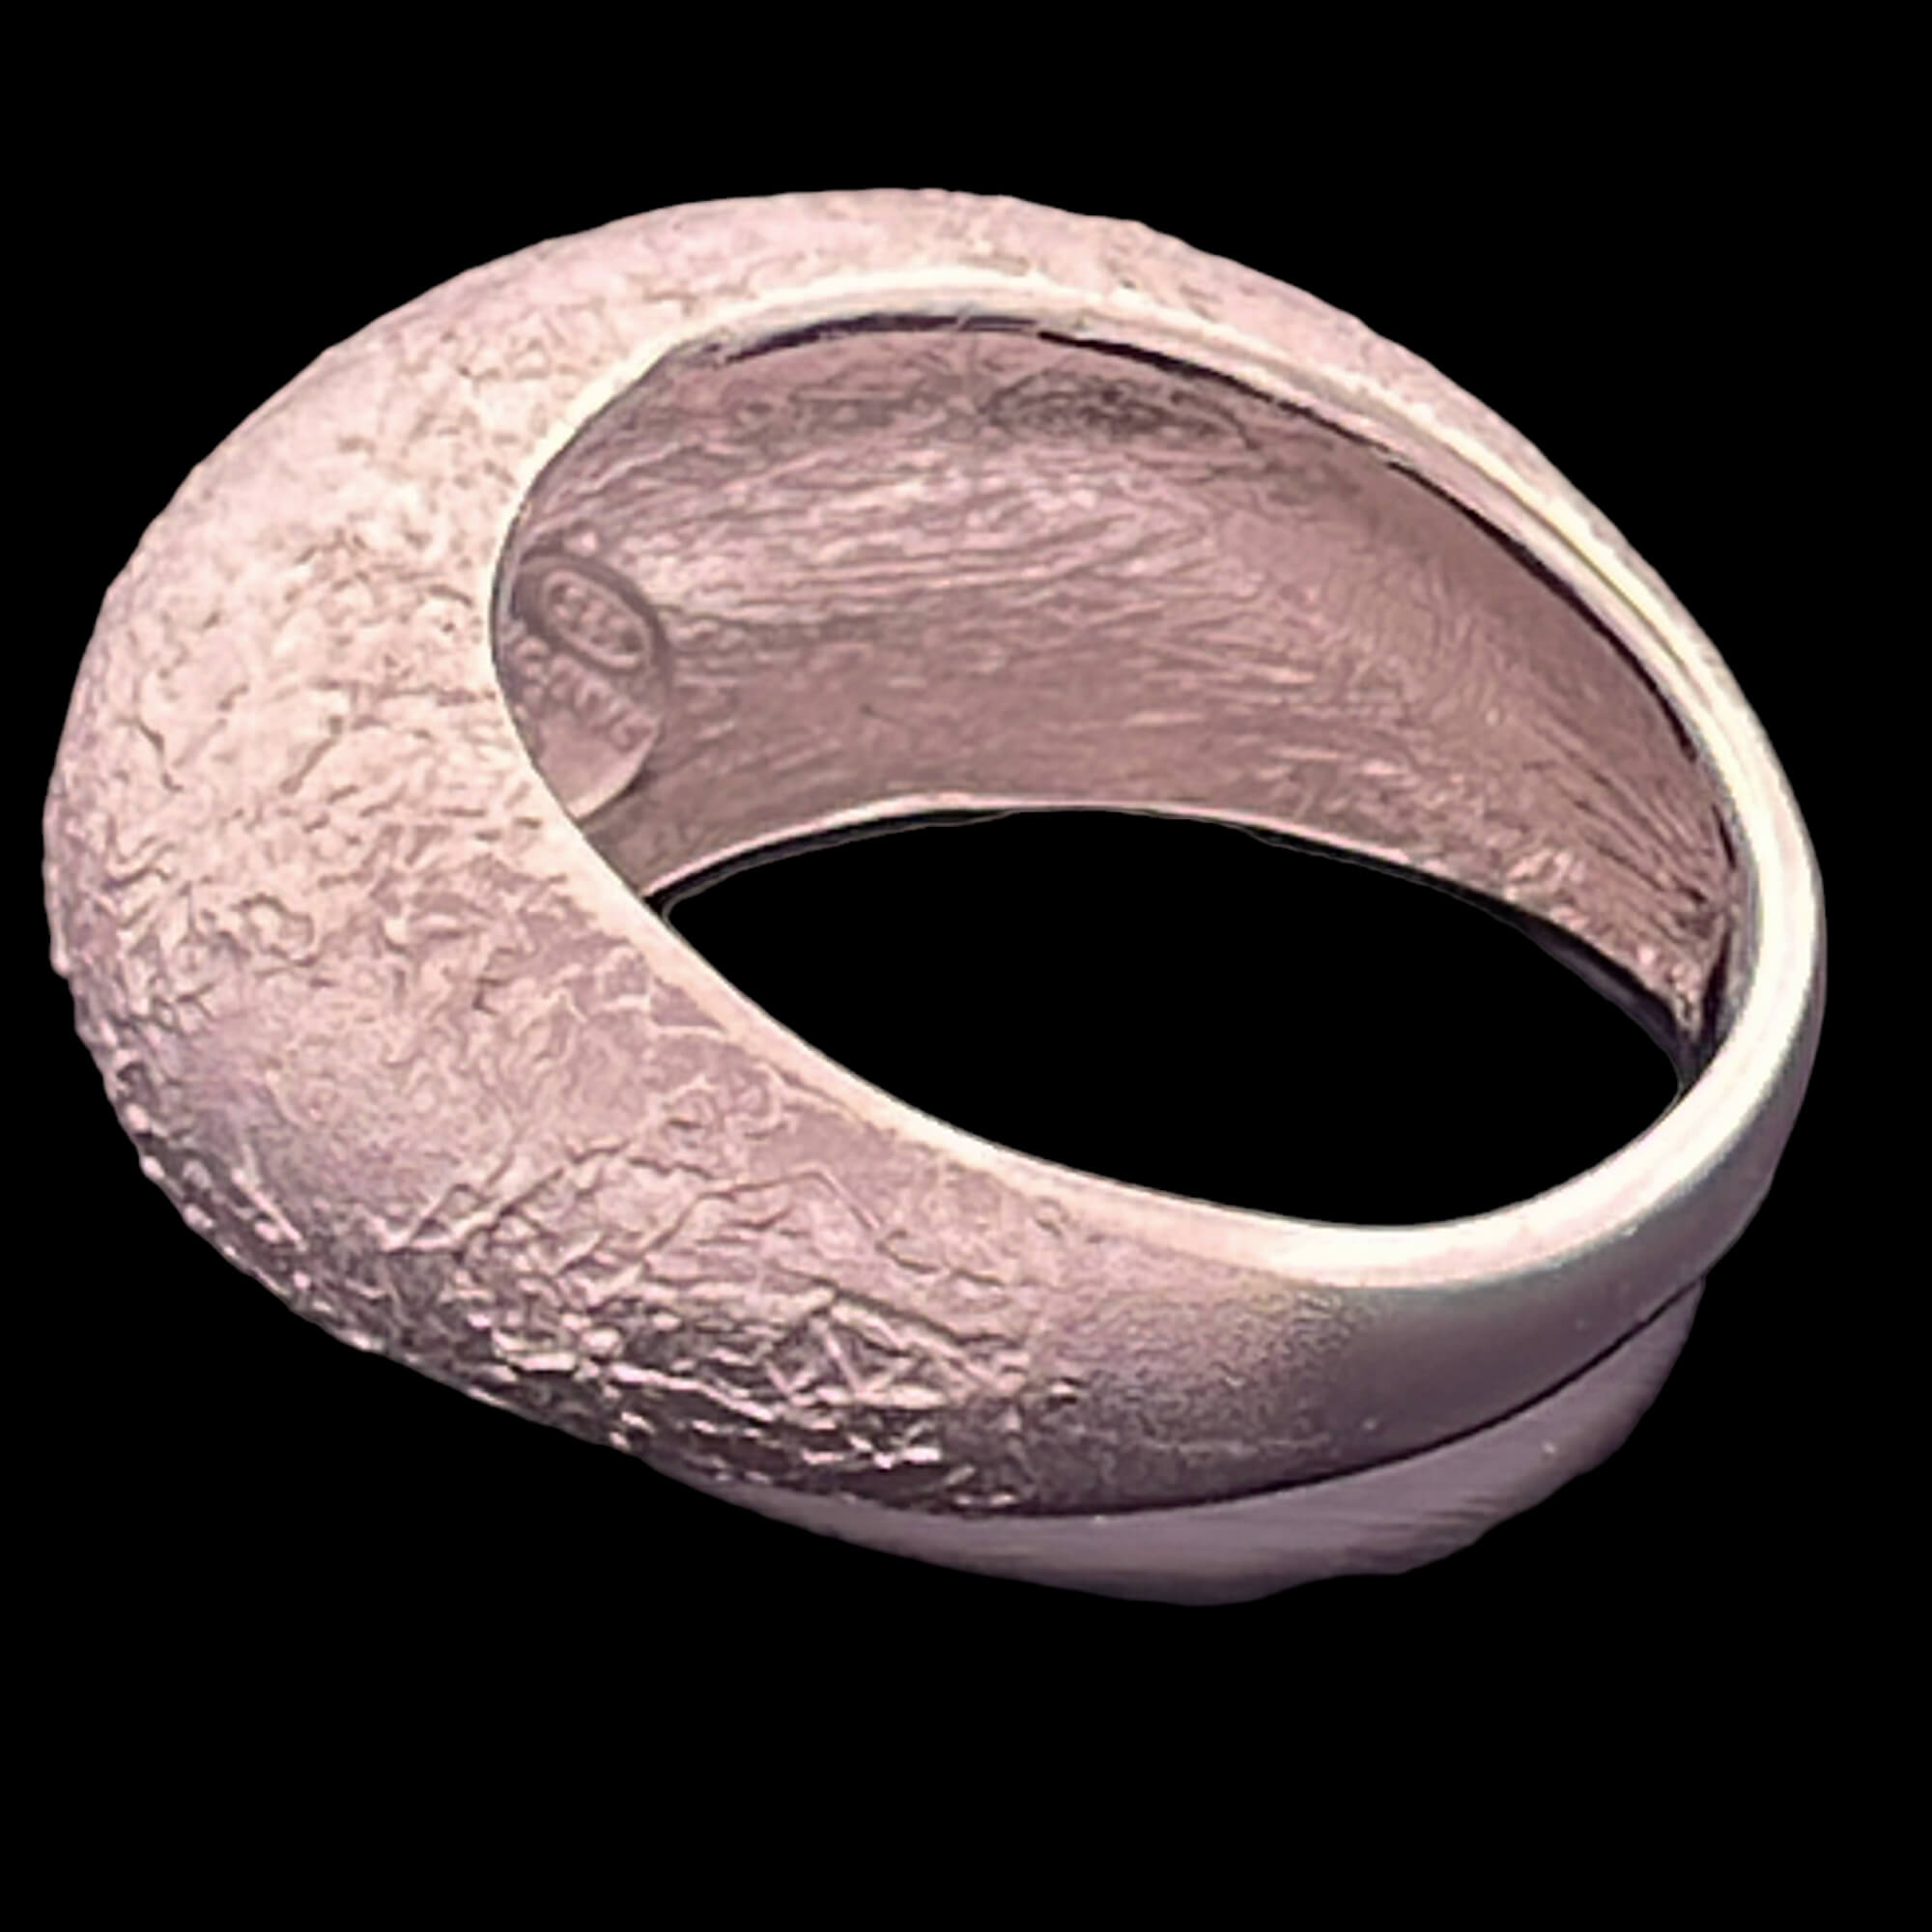 Worked silver and matte ring